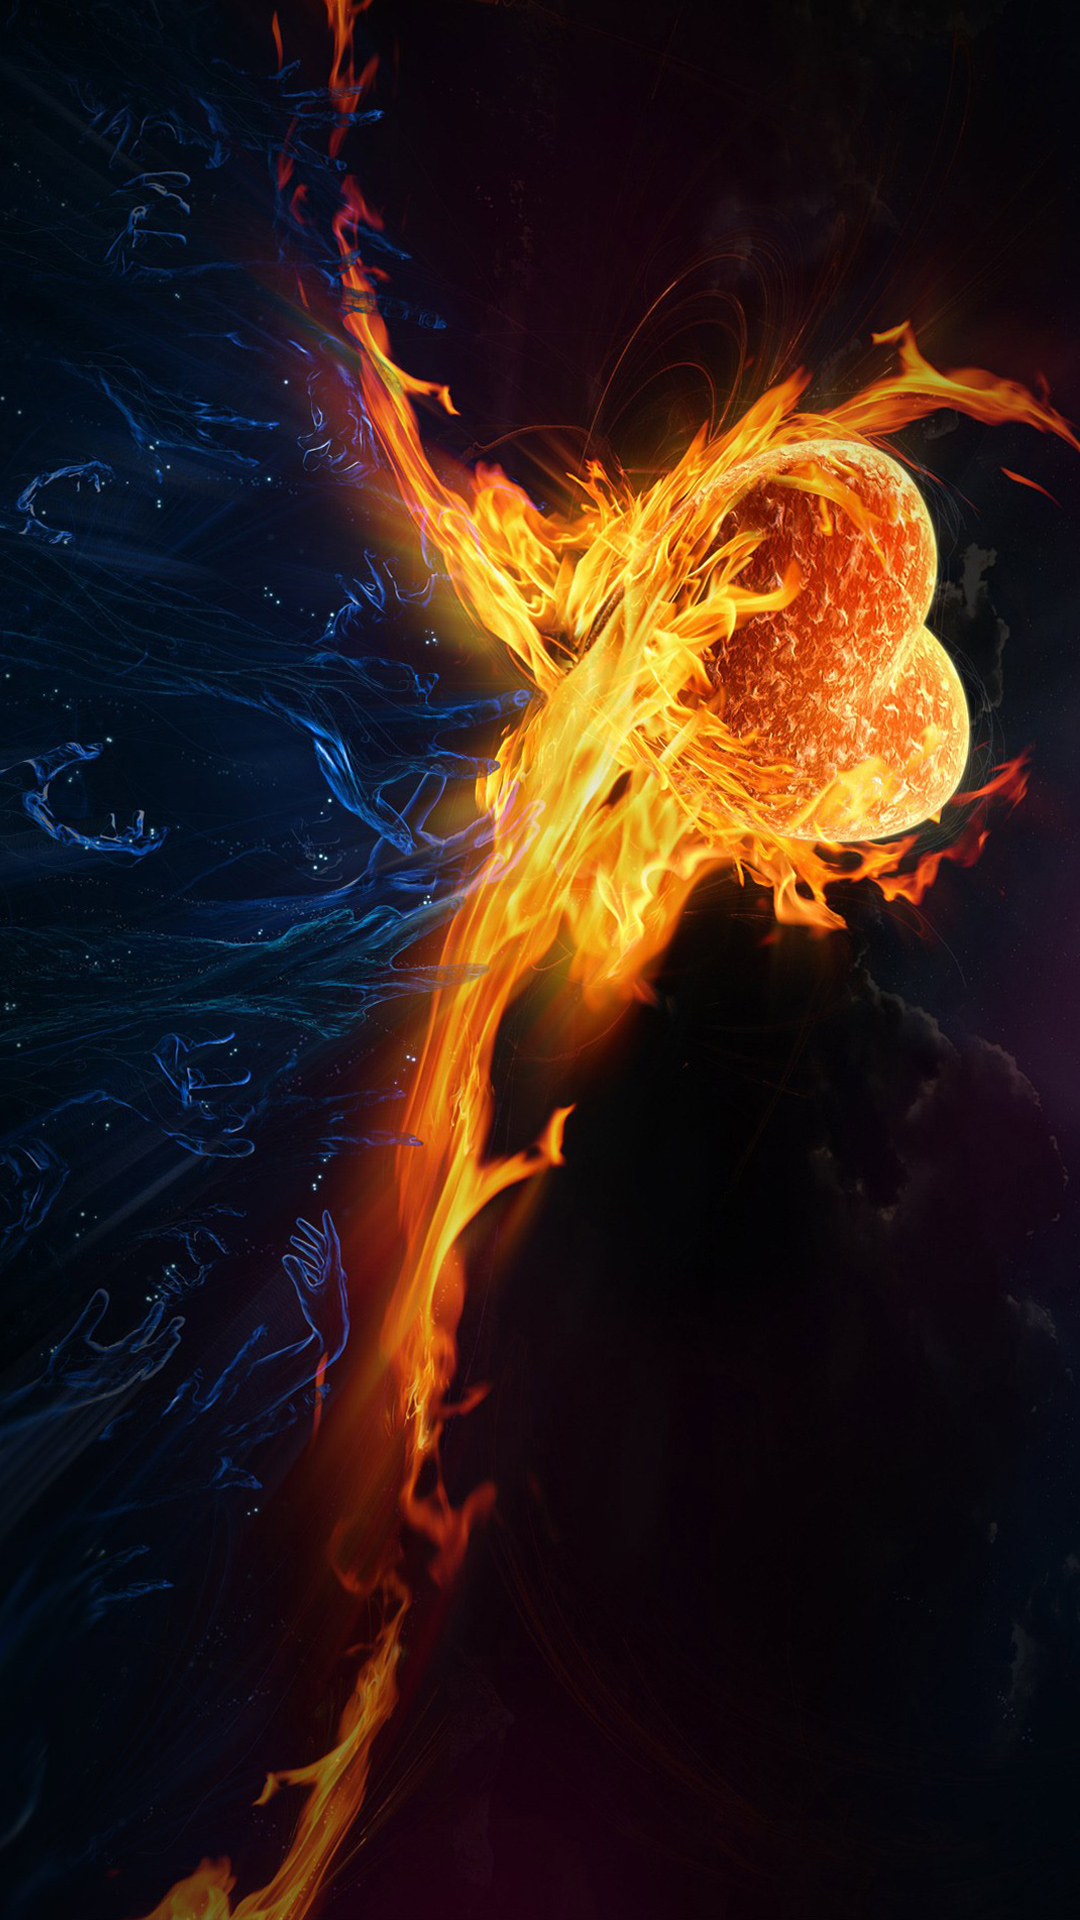 Fire Heart Abstract Full HD Smartphone Wallpaper Gallery